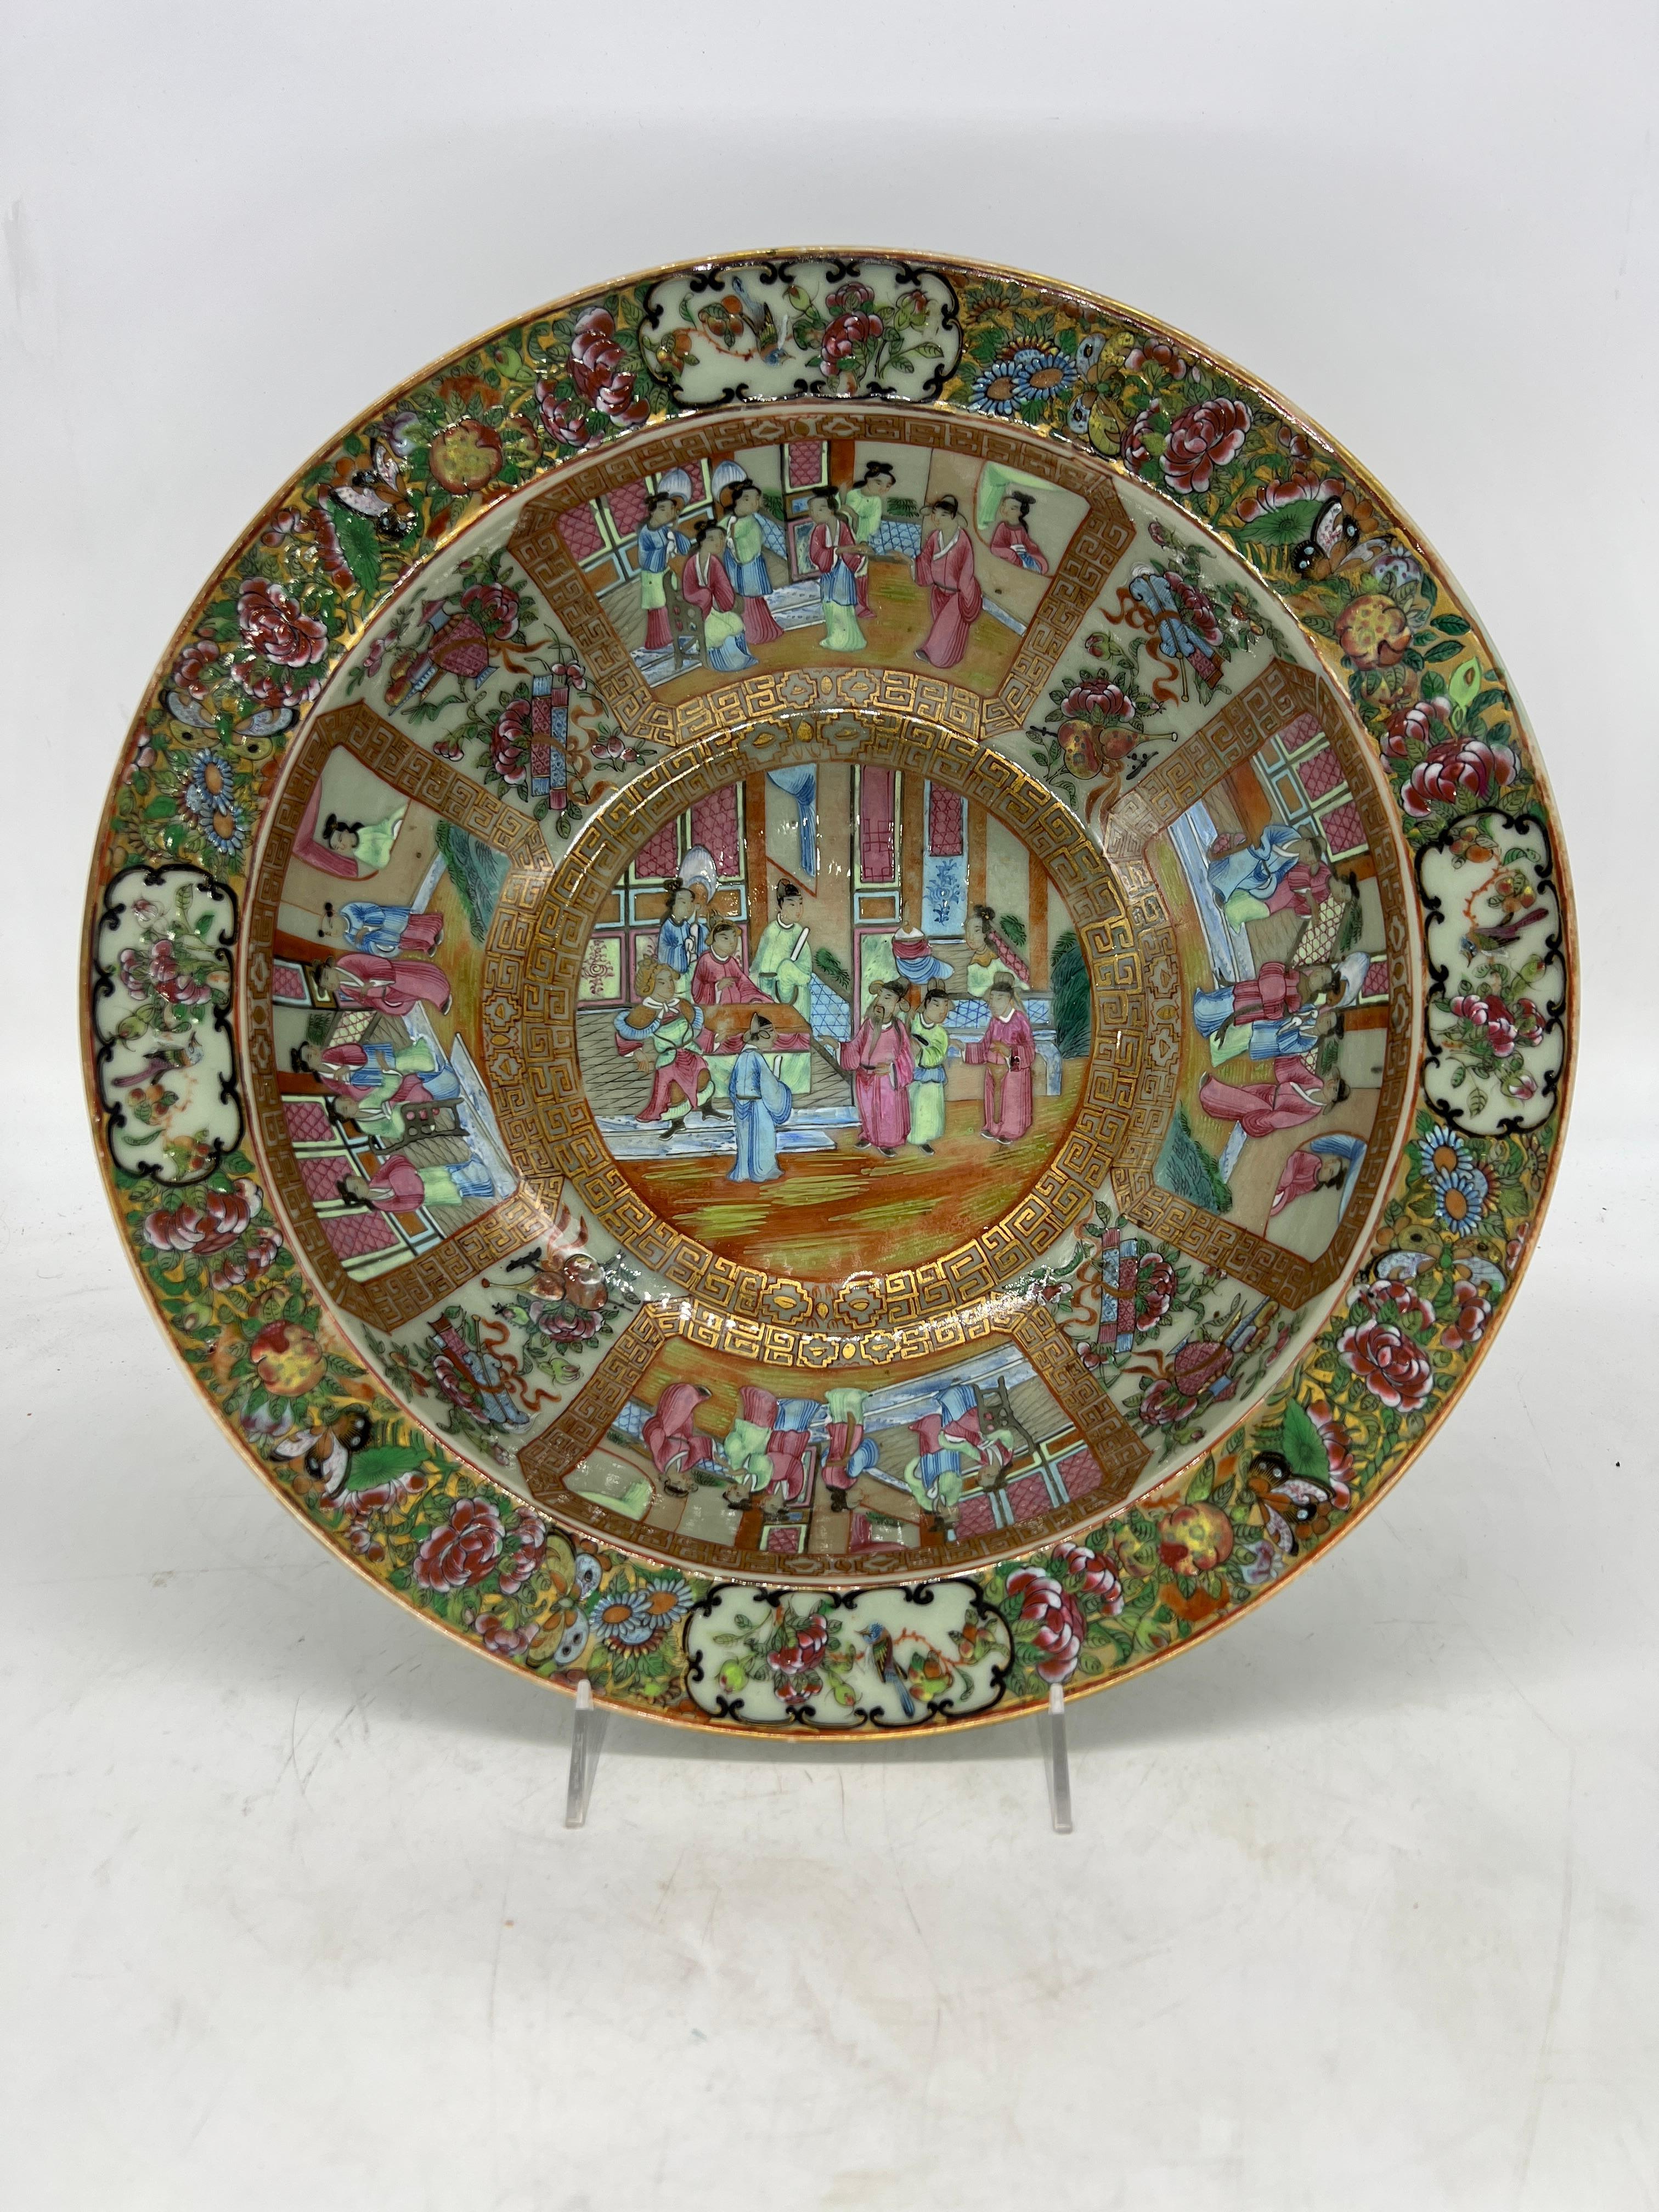 Chinese, 19th century.

A fine quality antique Chinese famille rose medallion wash basin or centerpiece bowl. The center has a vivid immortal courtyard scene surrounded by a greek key border and 4 matching windows to the interior edge. The border